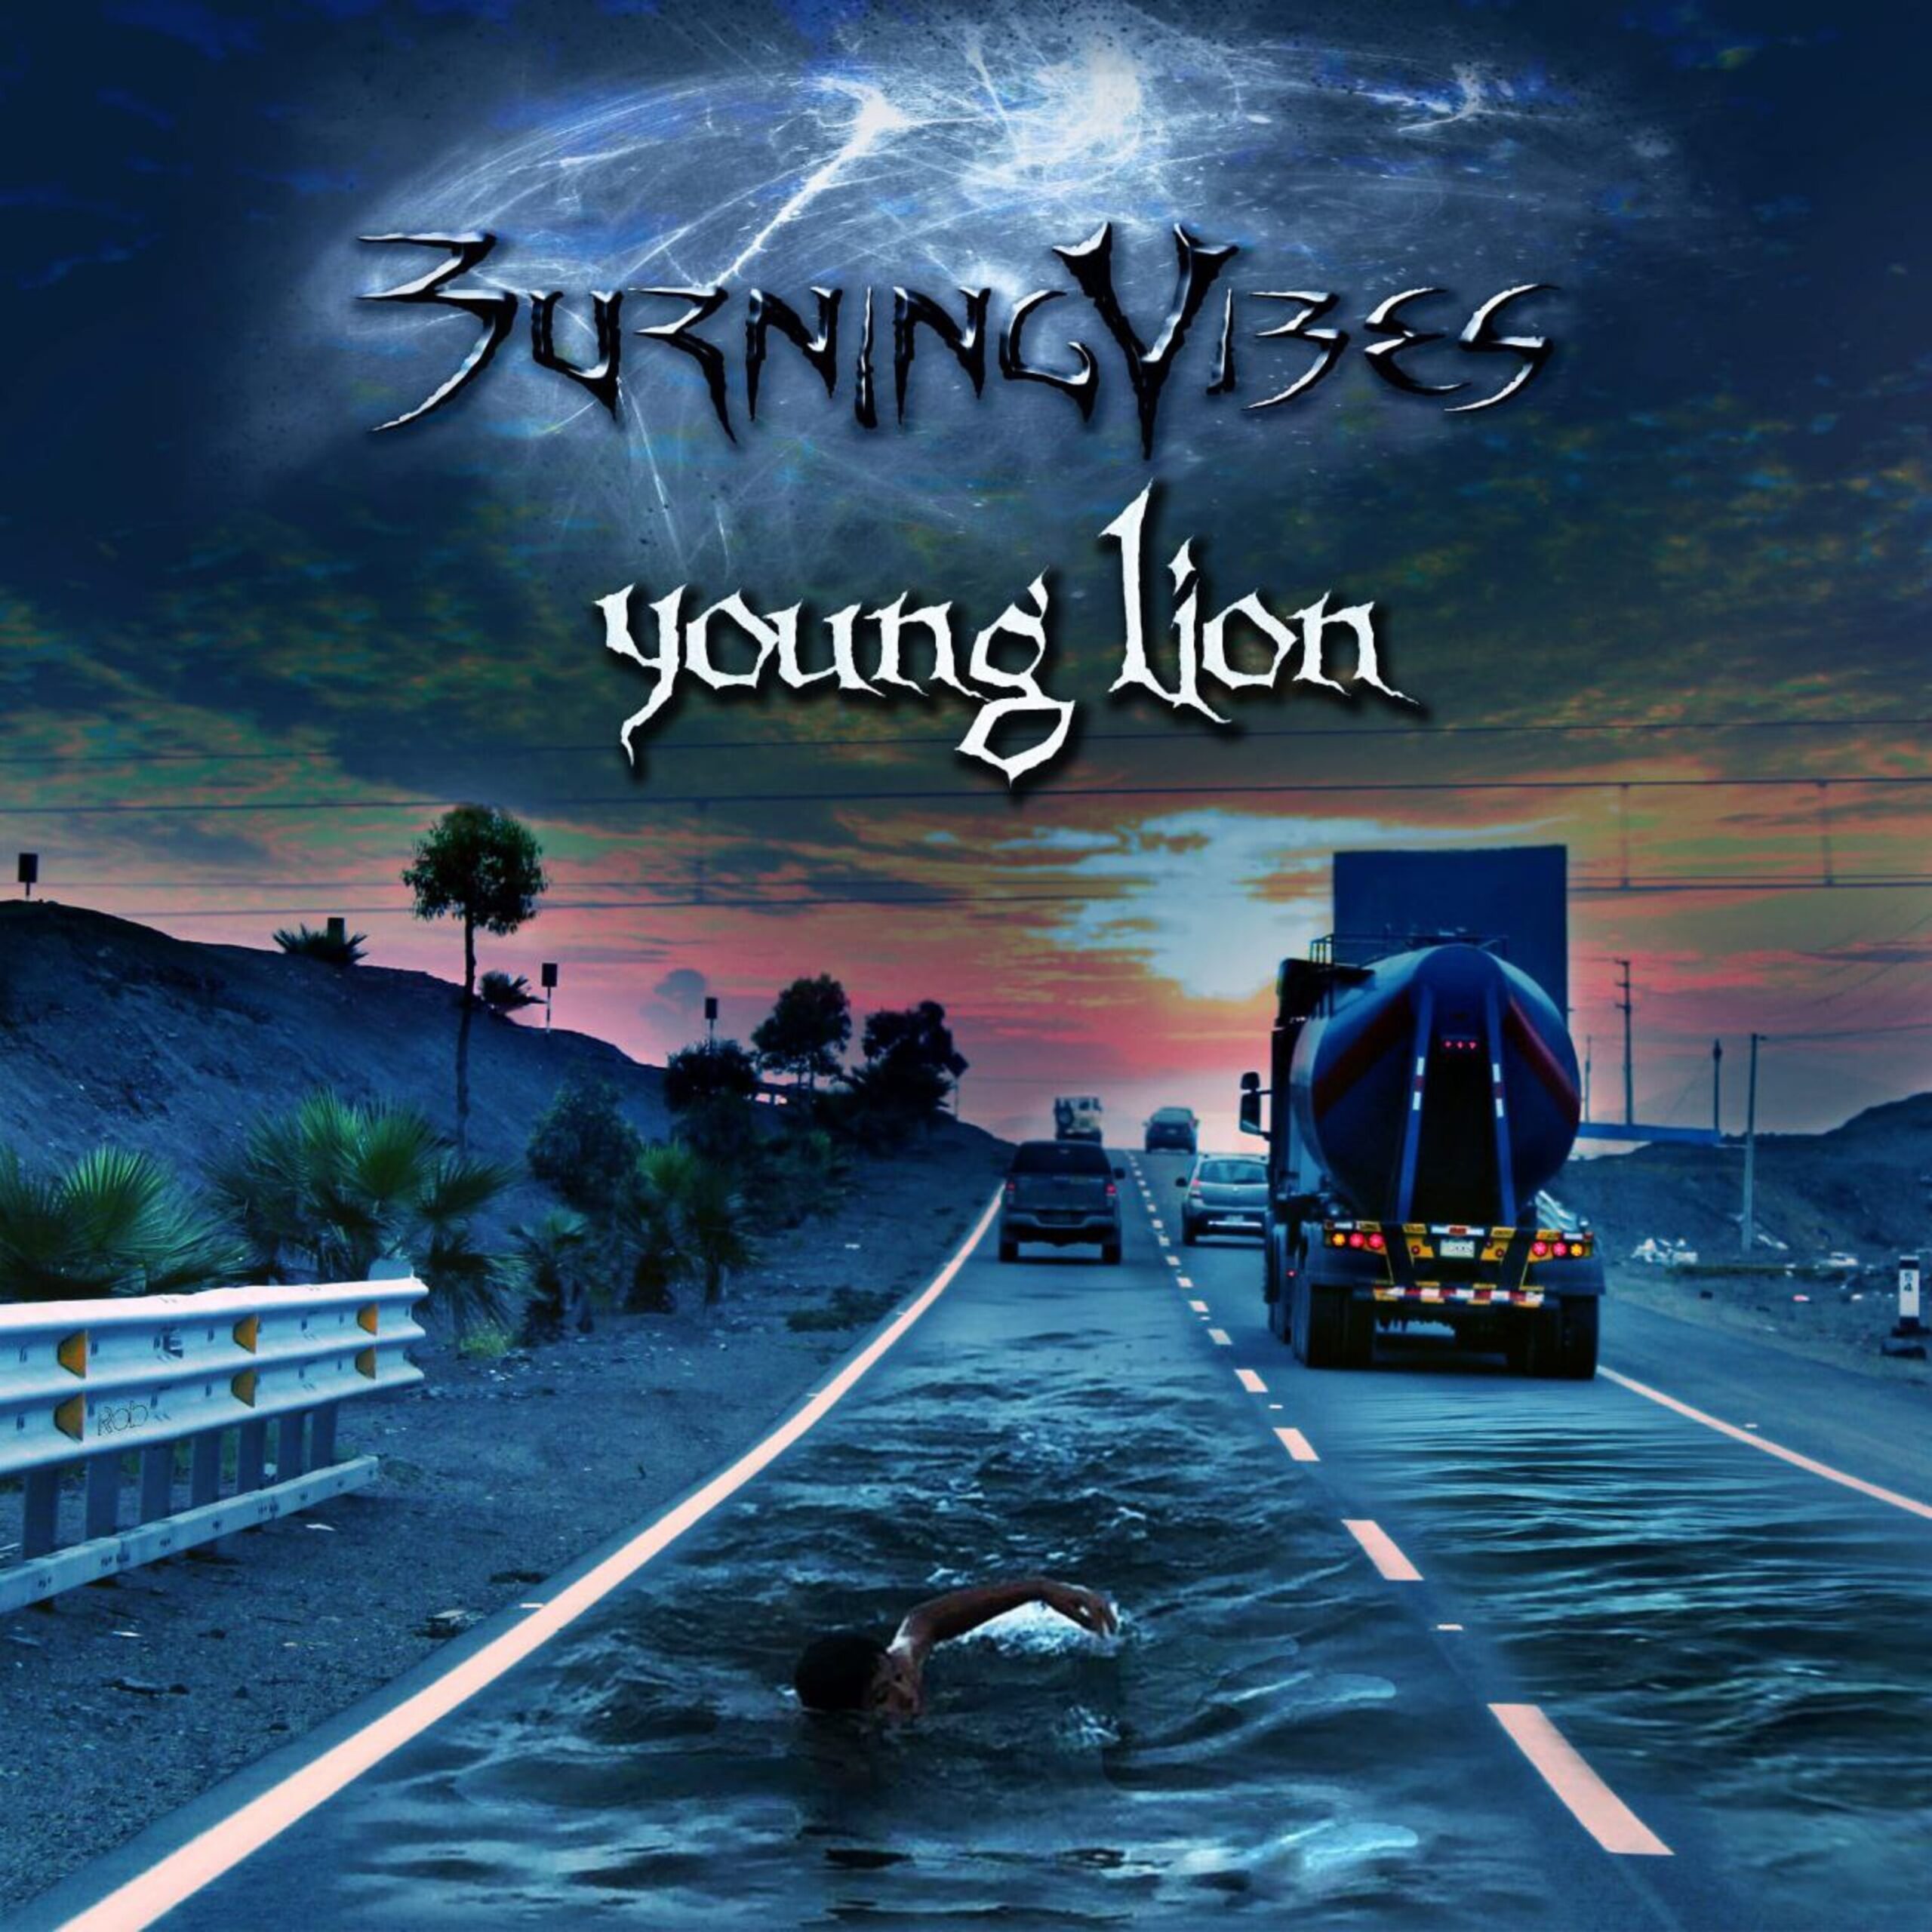 E’ online il nuovo singolo dei Burning Vibes “Young Lion”